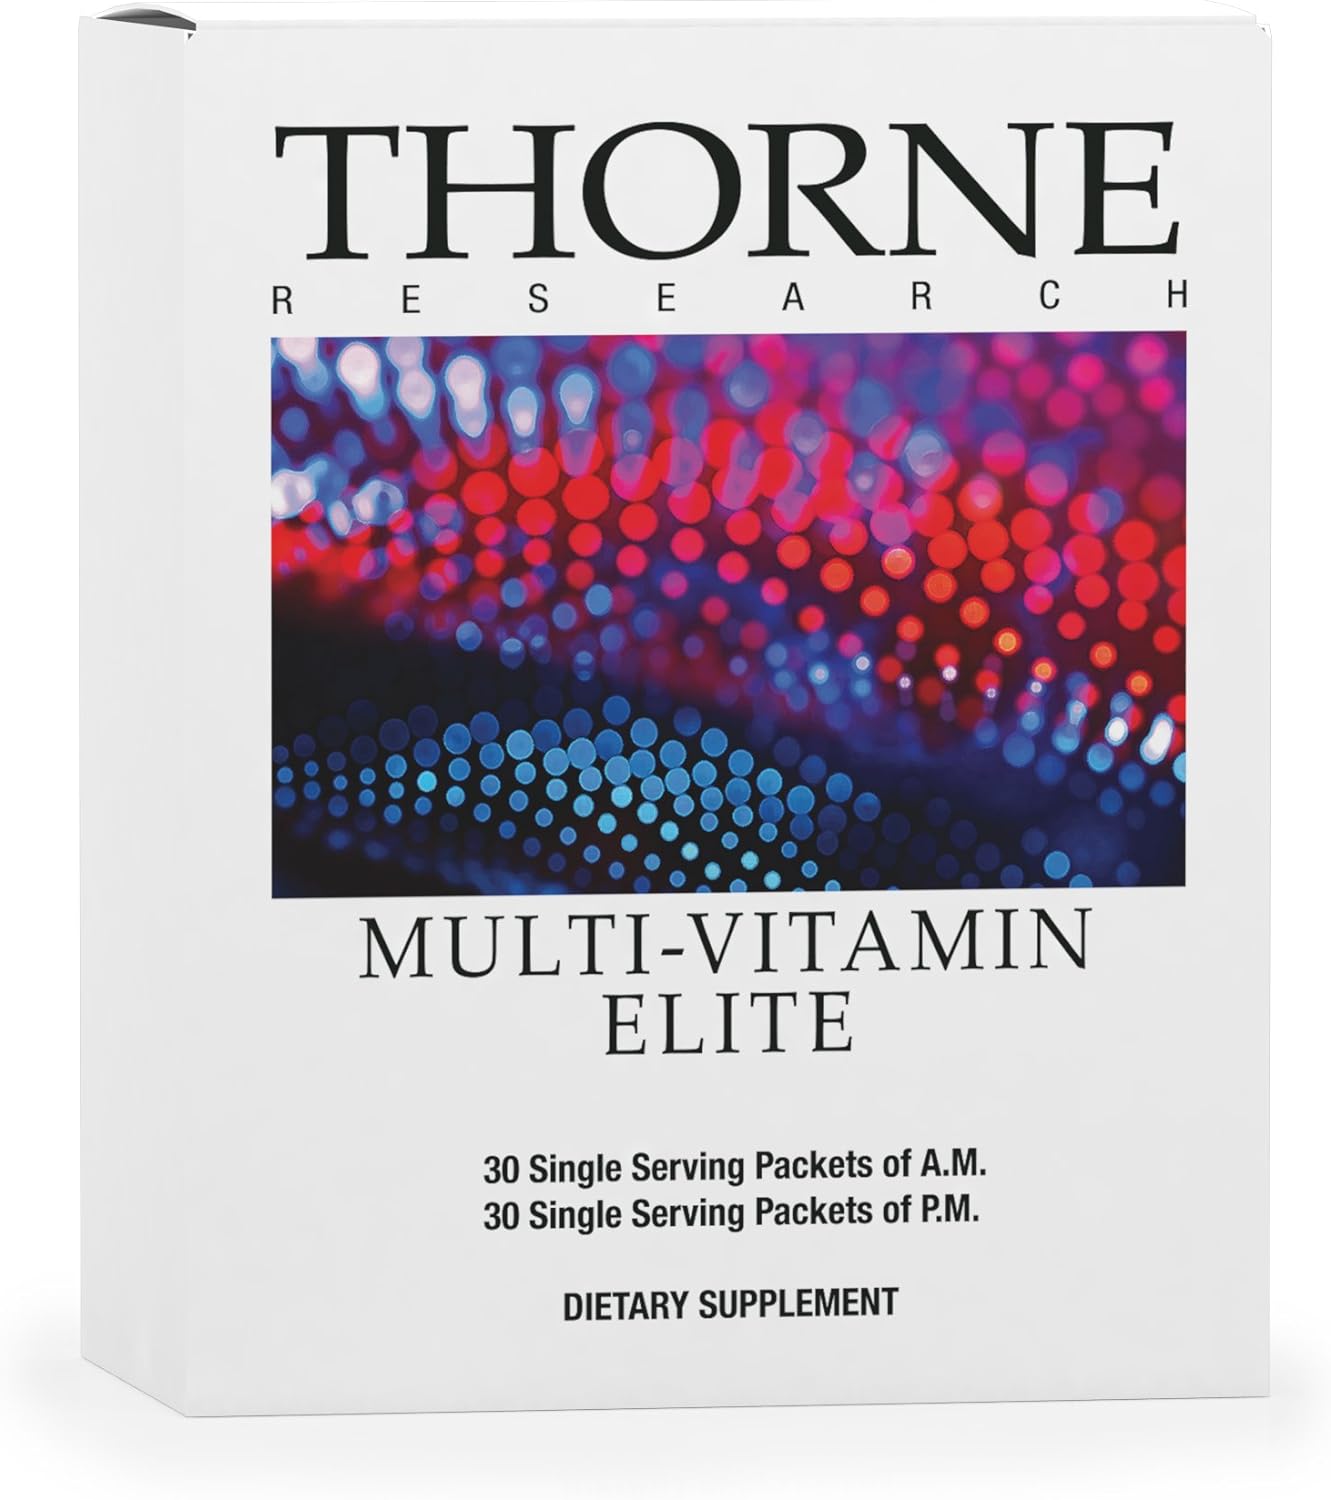 Thorne Research - Multi-Vitamin Elite Packets - A.M. and P.M. Formula to Support a High-Performance Nutrition Program - NSF Certified for Sport - 30 Single Serving Packets of AM and PM